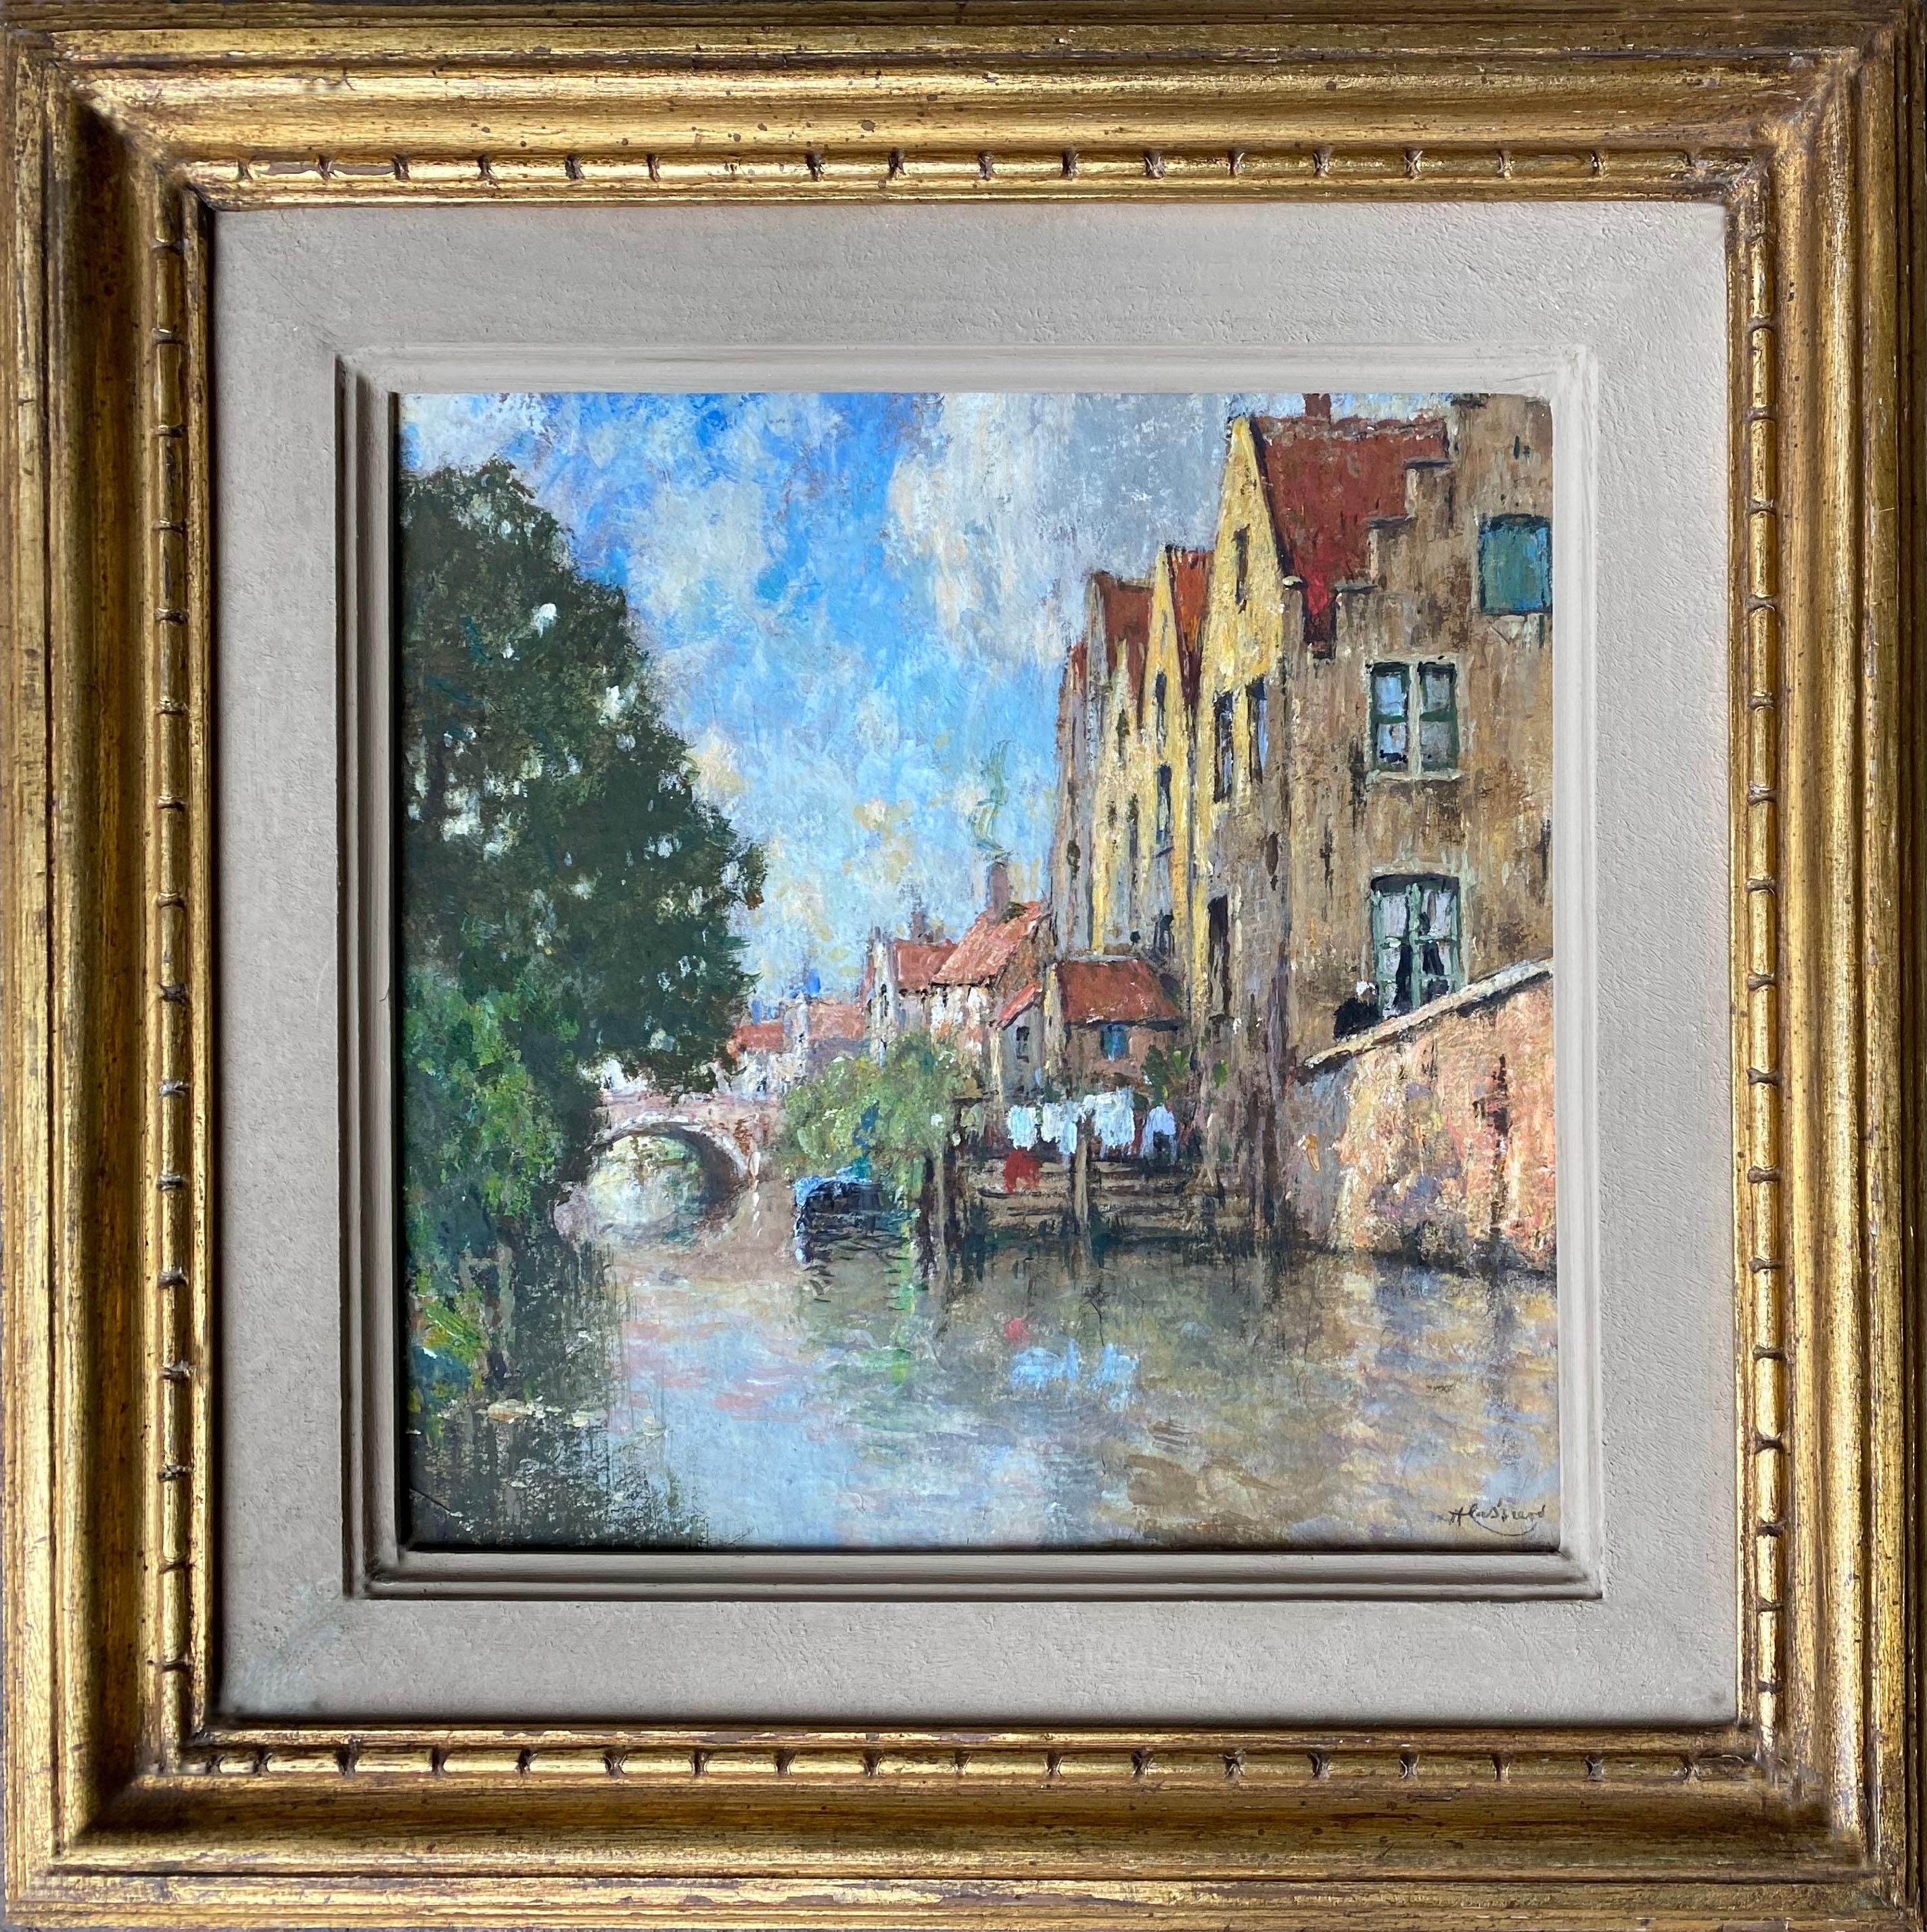 Henri Cassiers
Antwerp 1858 – 1944 Ixelles
Belgian Painter

'A View of Bruges'
Signature: Signed bottom right
Medium: Mixed Media
Dimensions: Image size 23,50 x 23,50 cm, frame size 30,50 x 30,50 cm

Biography: Cassiers Henry, born on August 11,